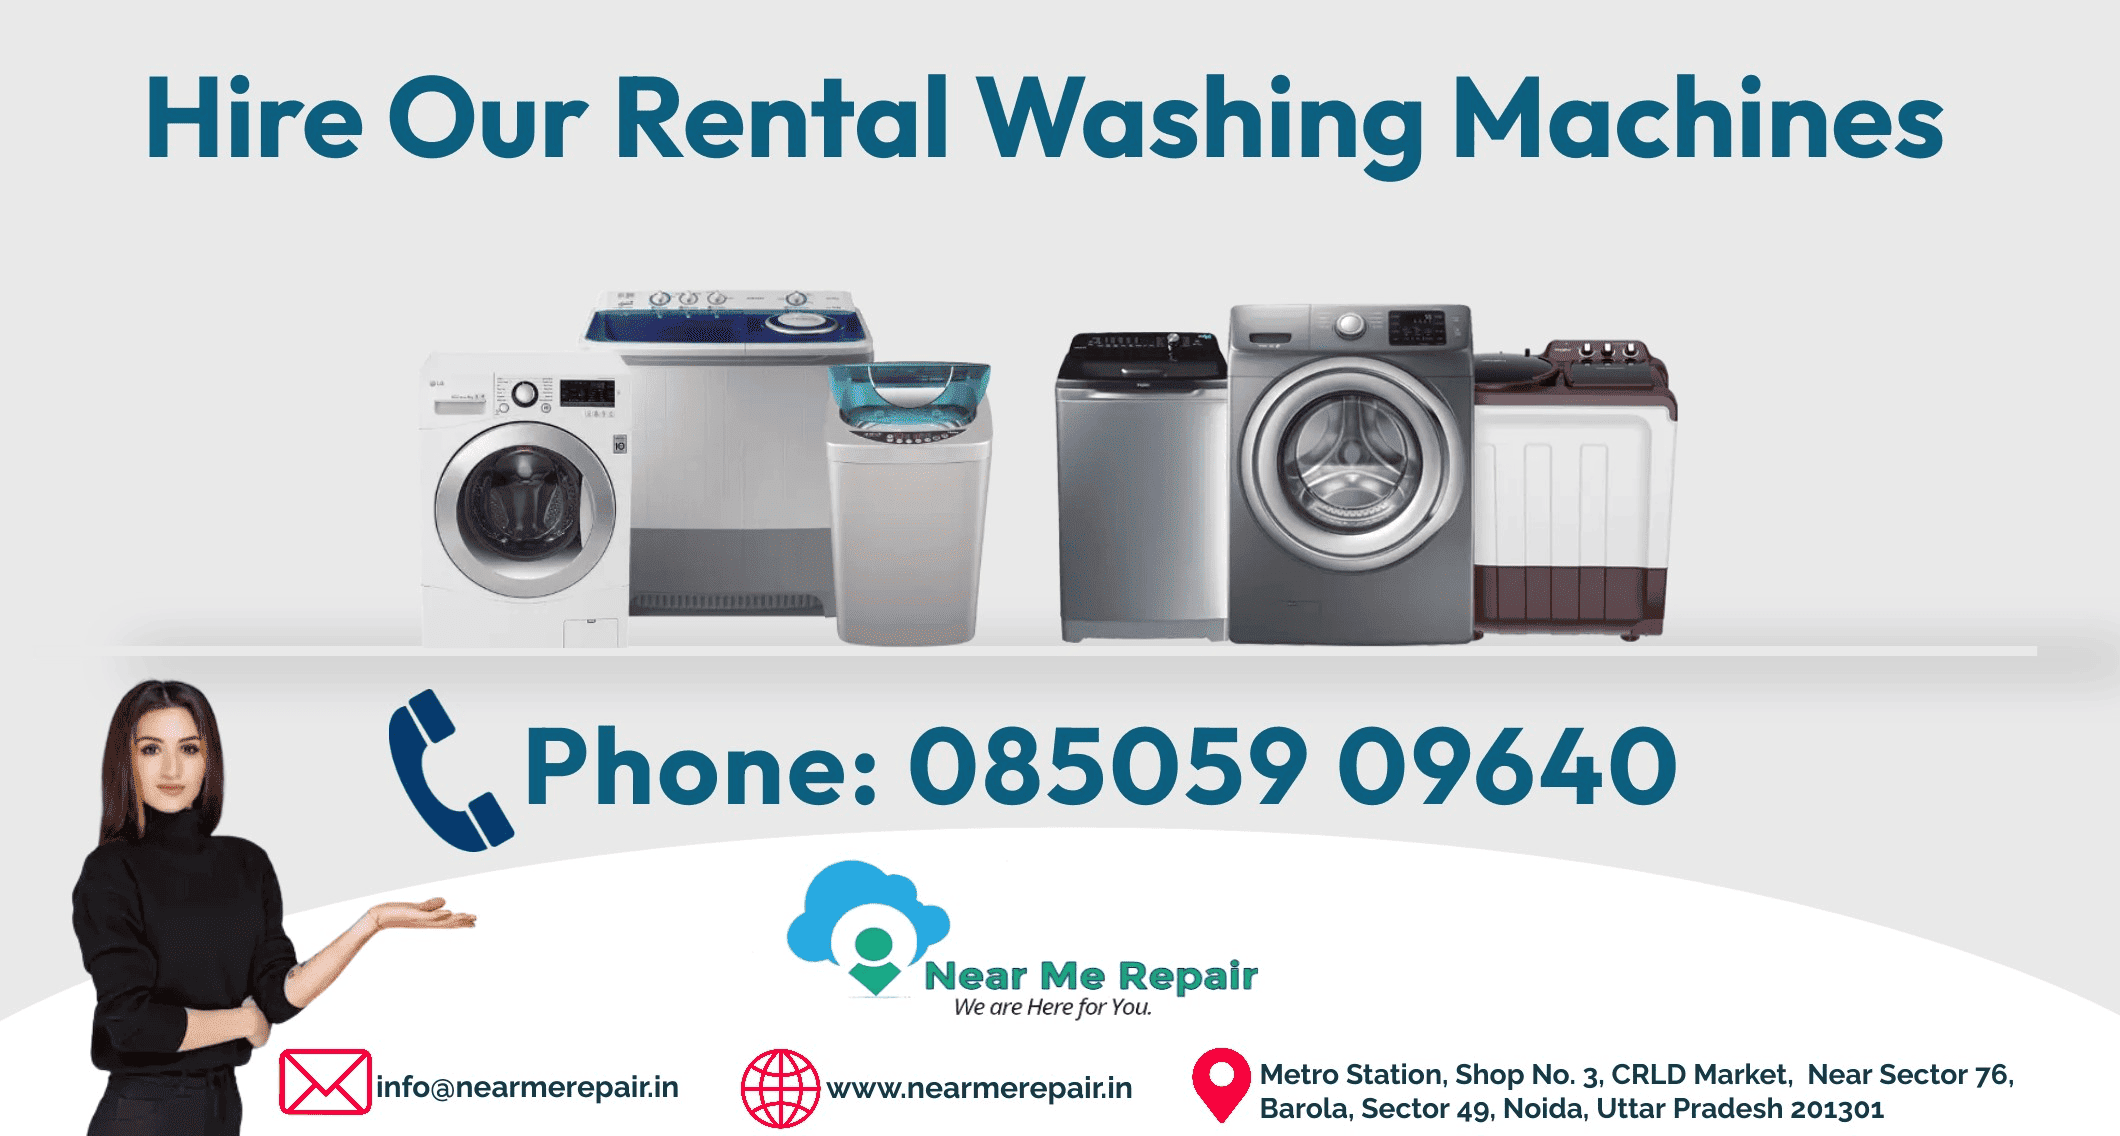 Explore hassle-free laundry with our rental washing machines near Delhi-NCR, offering convenience and efficiency at your fingertips.